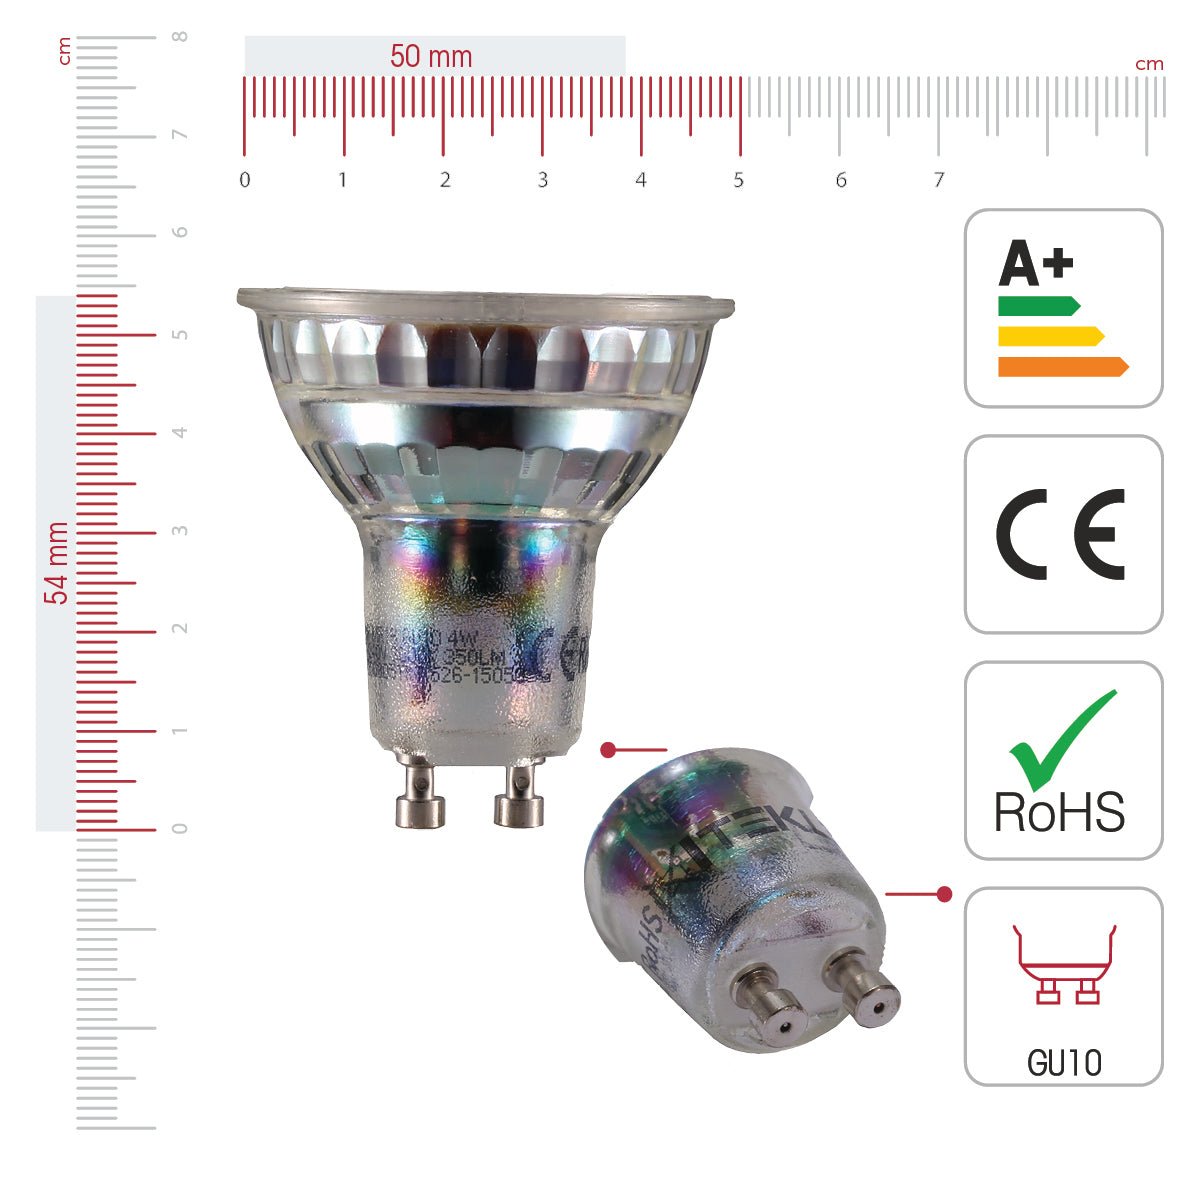 Visual representation of product measurement and certification of crux led spot bulb mr16 gu10 4w 3000k warm white pack of 6/10